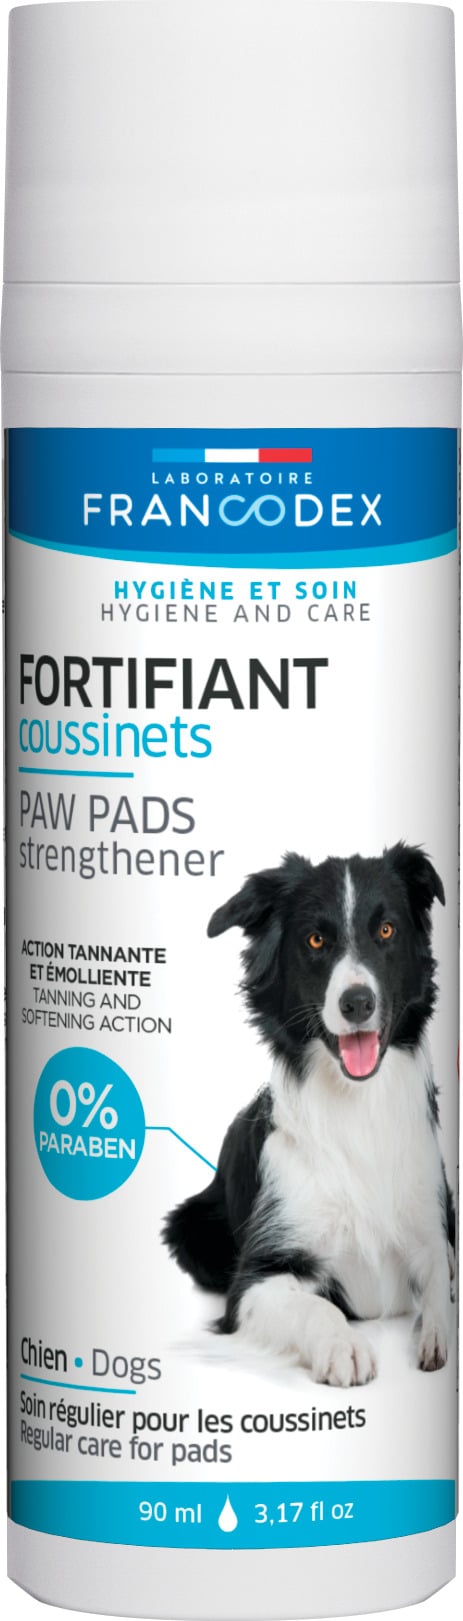 Fortifiant coussinet plantaire chien 90ml